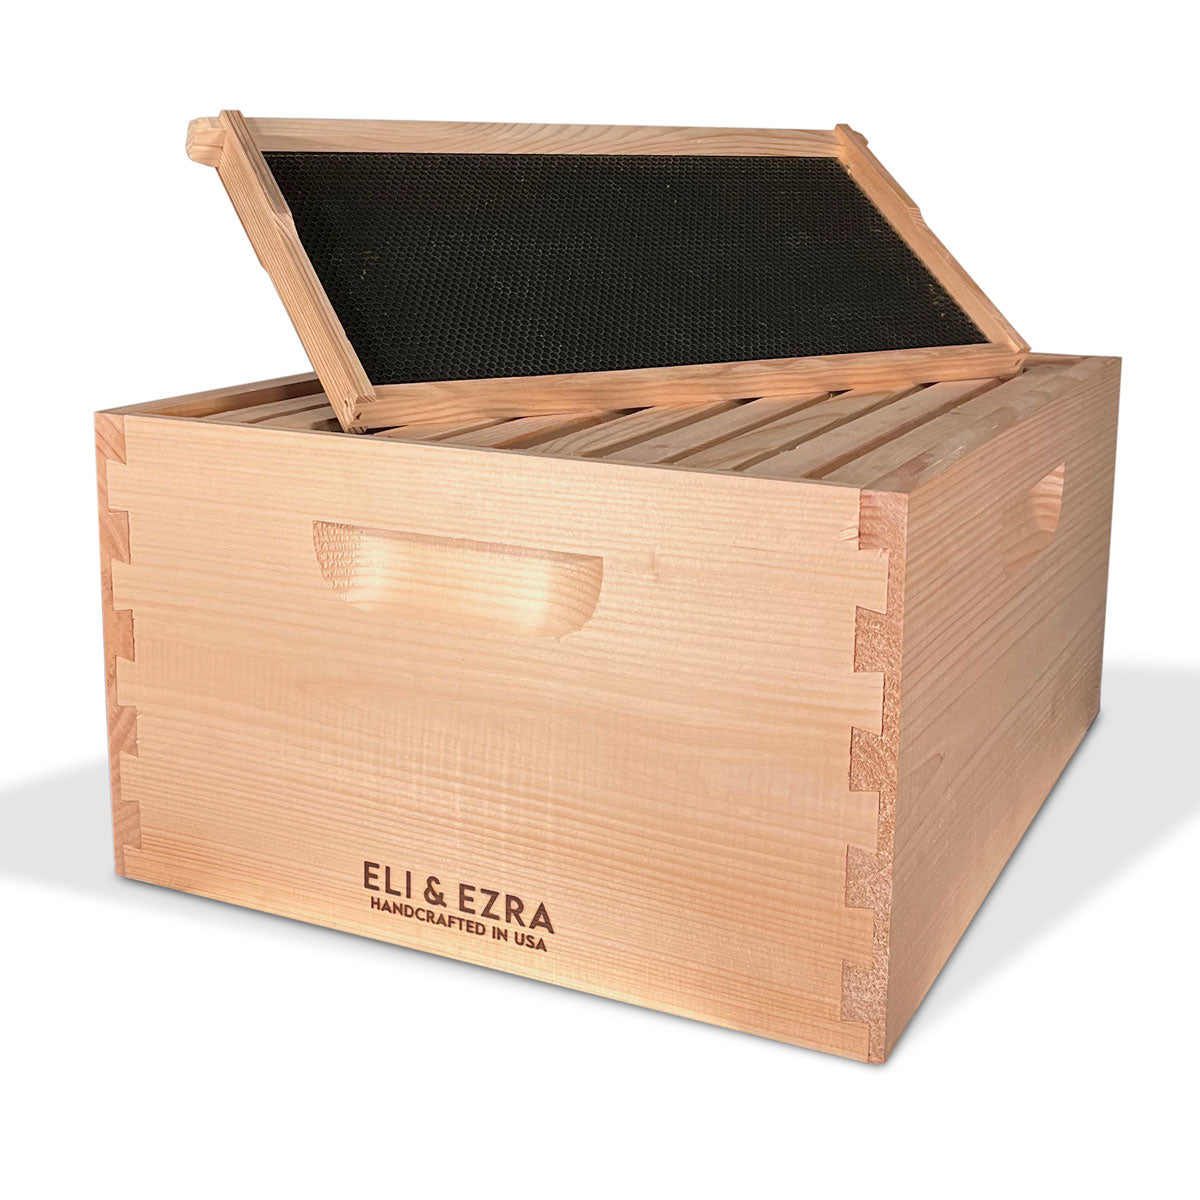 10 Frame Eli and Ezra Premium Amish-Made in USA Beehive Kit: 1 Deep + 1 Medium Boxes with Dovetail Joints